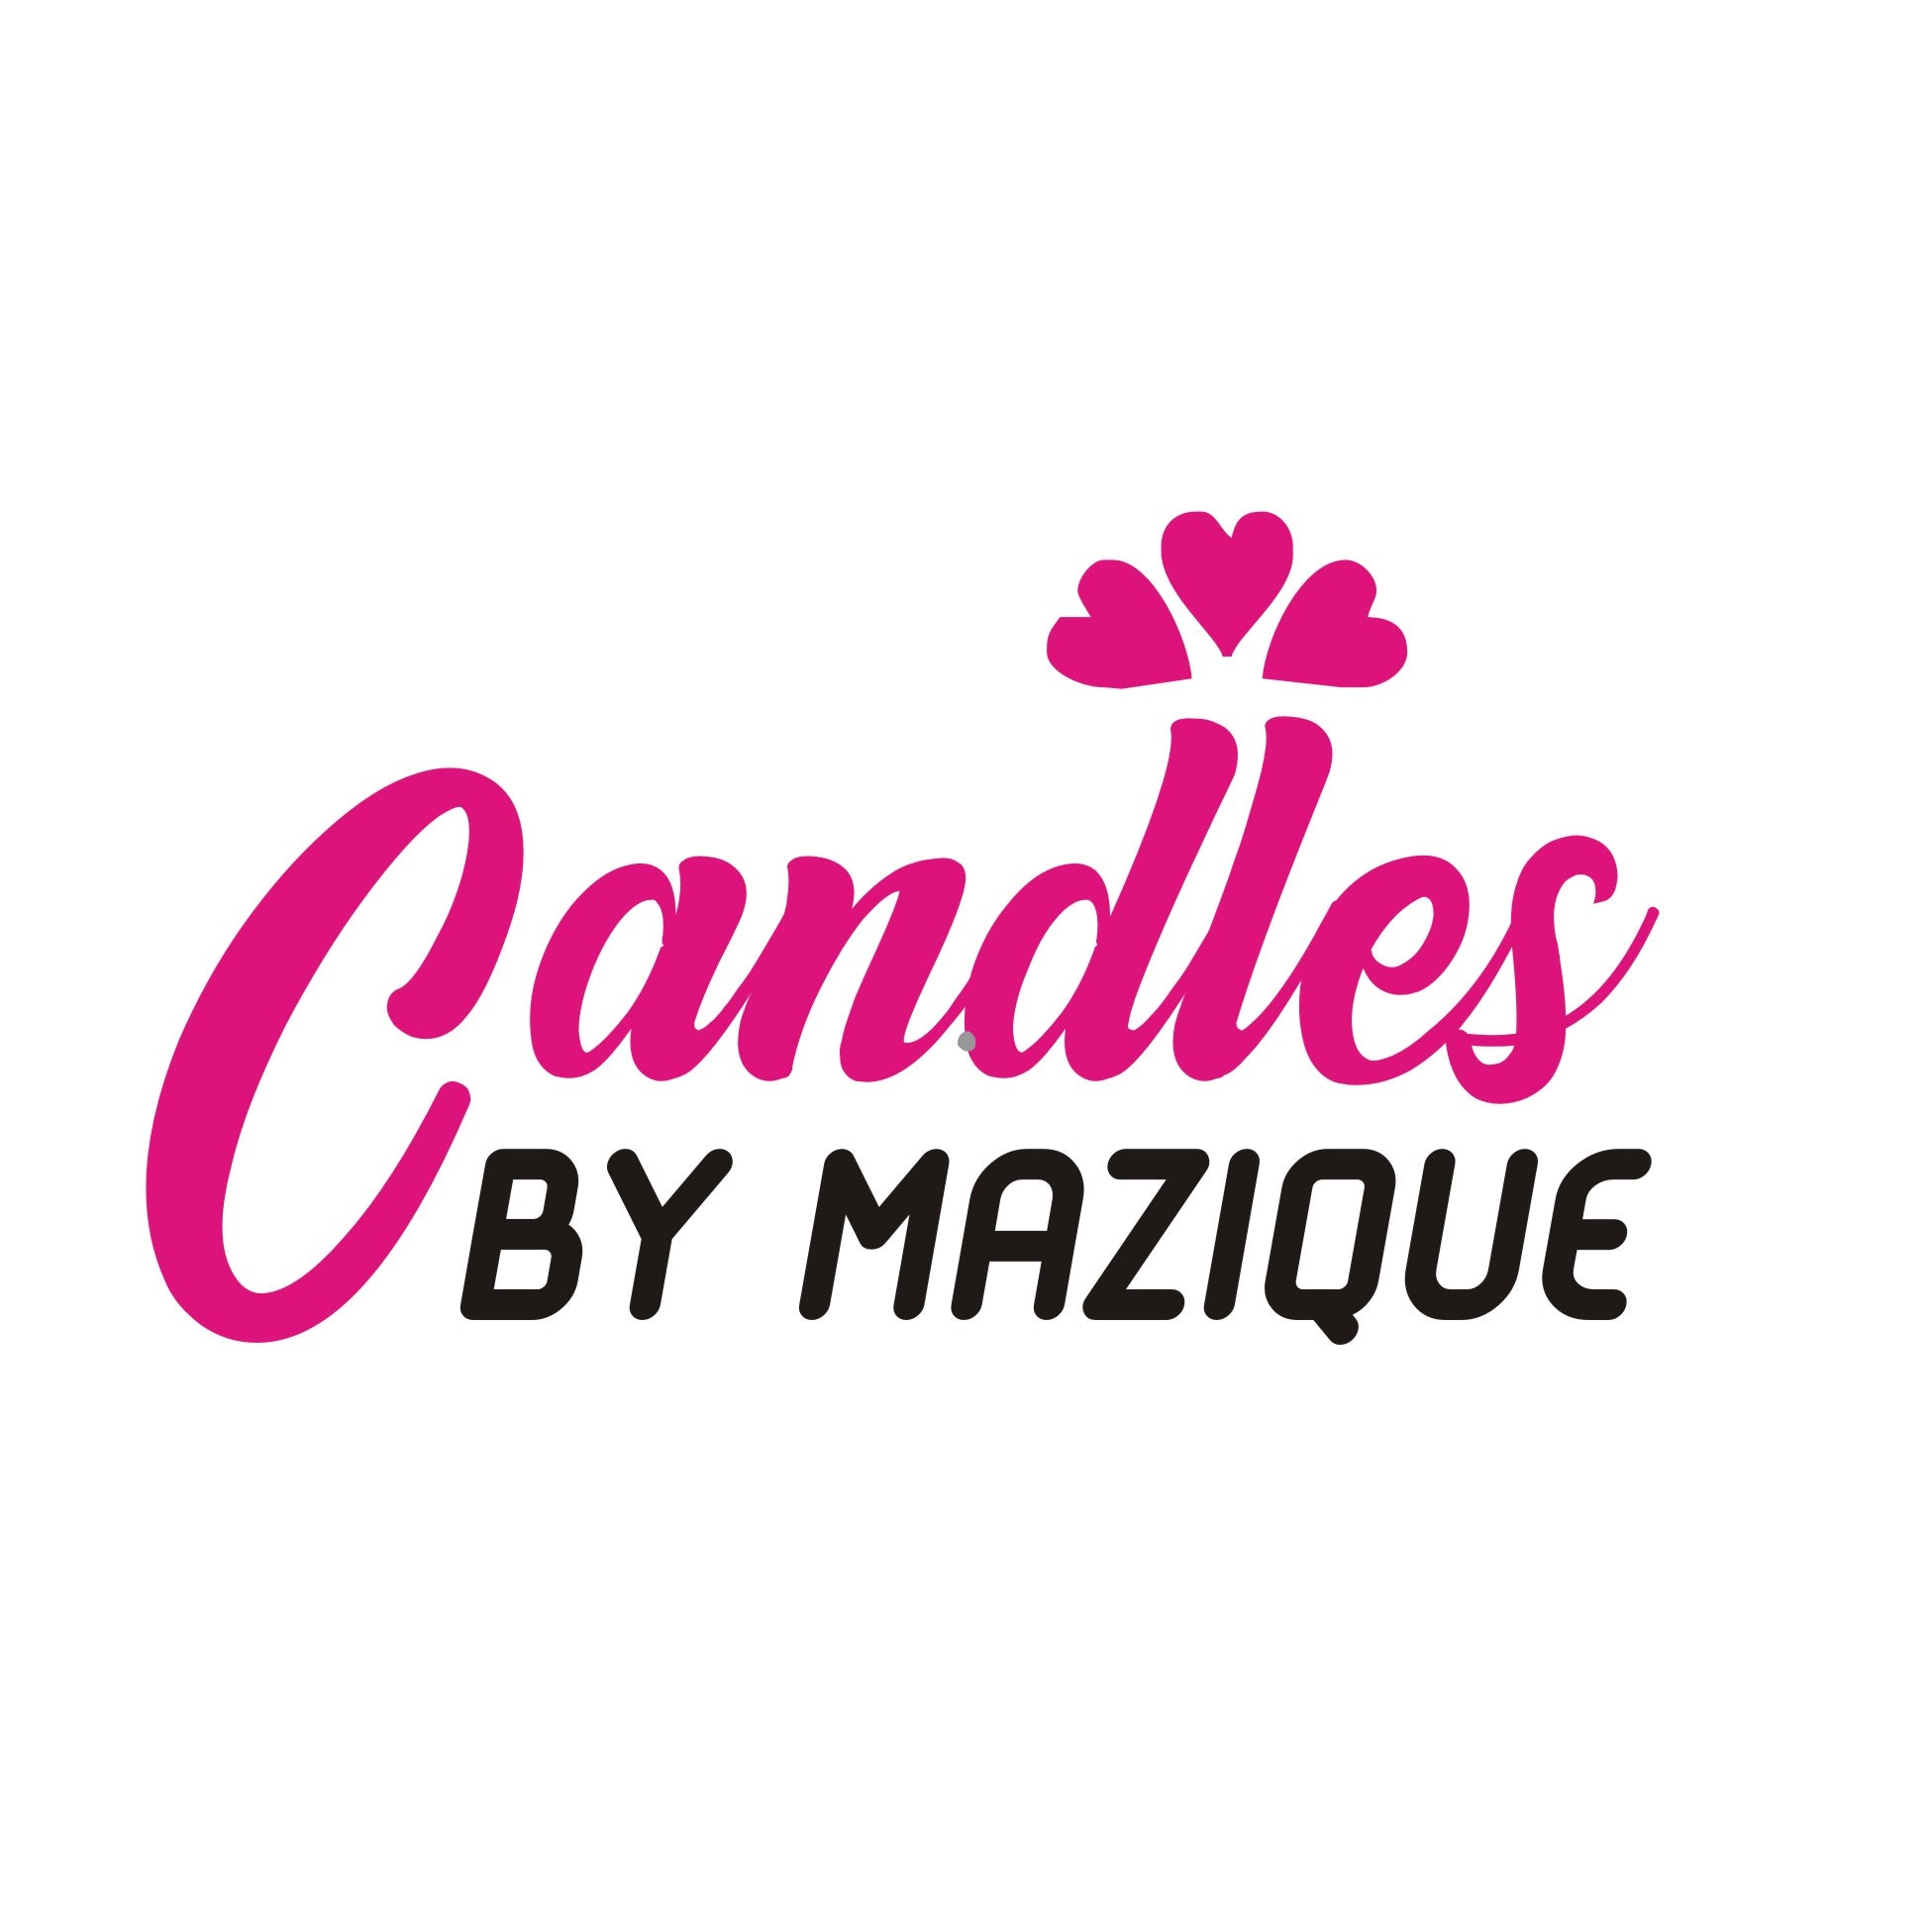 Candles by Mazique